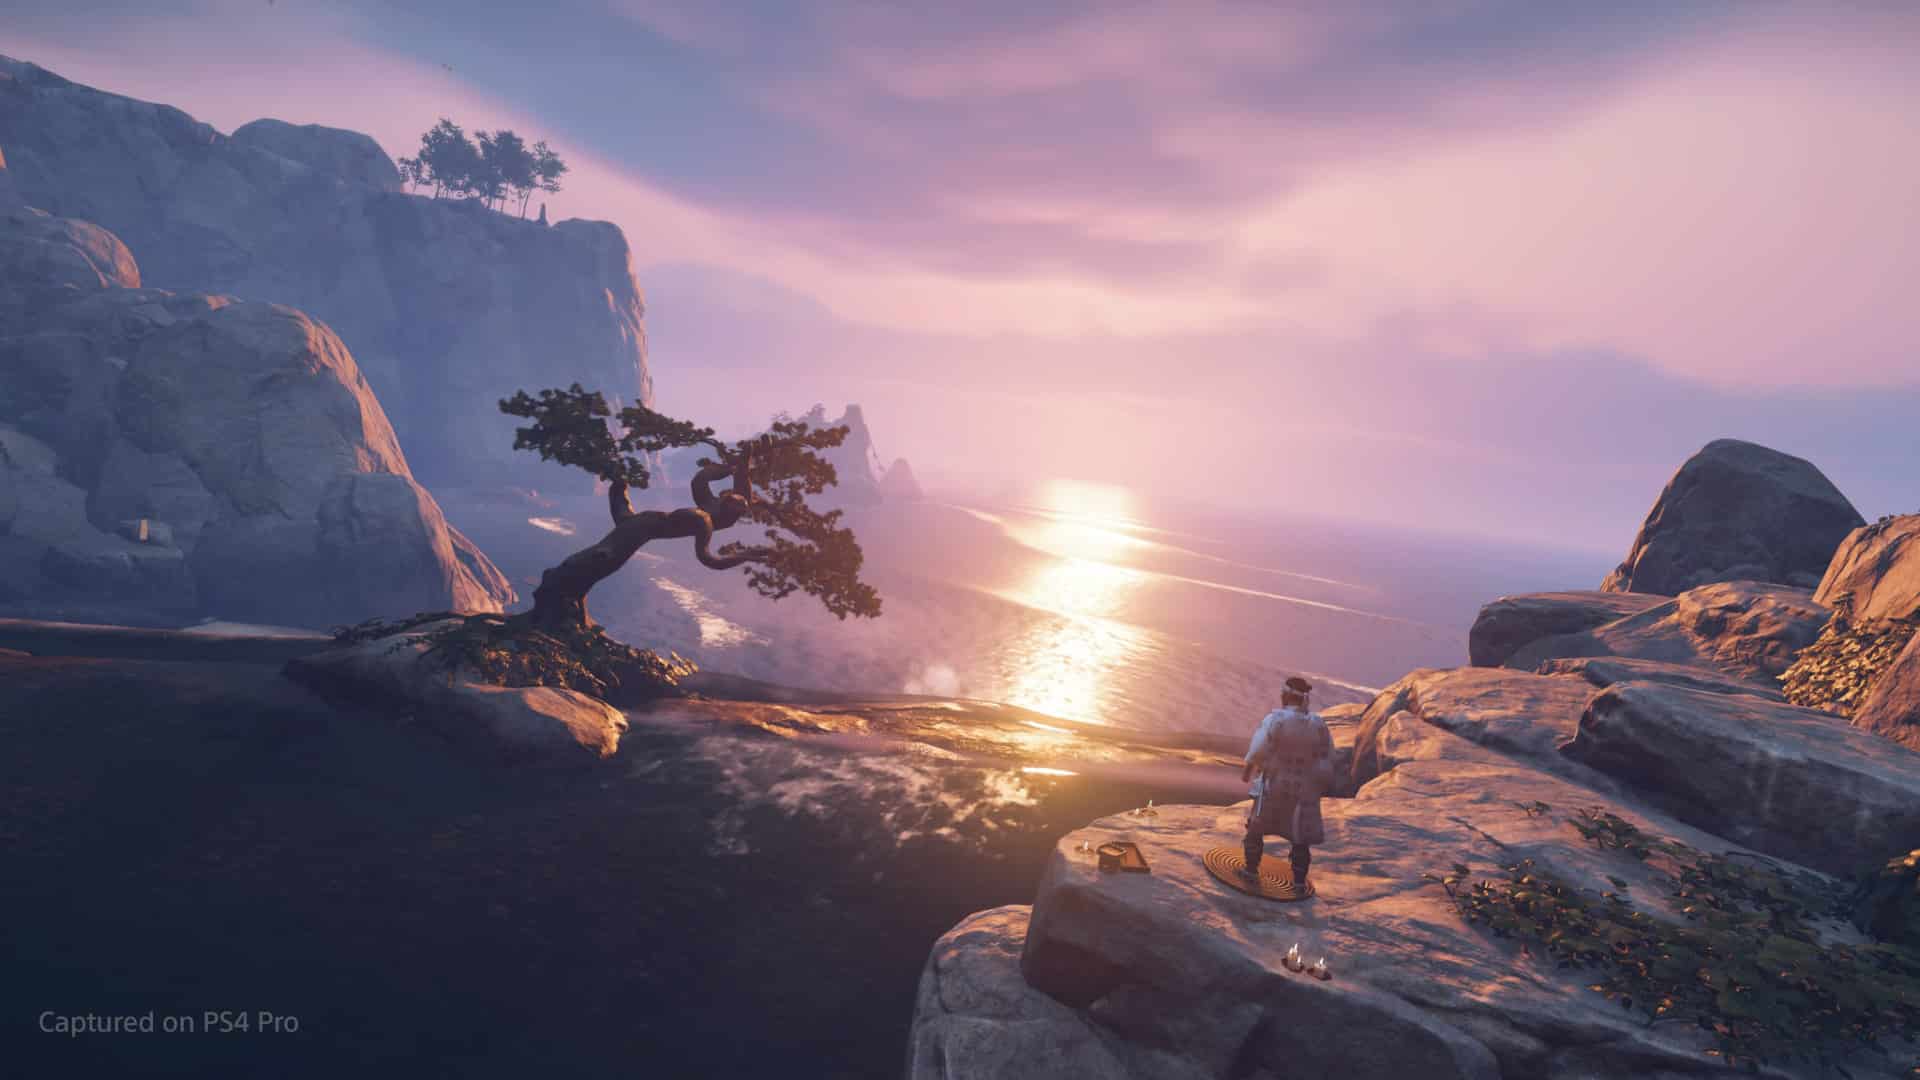 Ghost of Tsushima addicting open world with slow, deliberate, addicting pace and satisfying chores (and beautiful Photo Mode) - Sony, Sucker Punch Productions